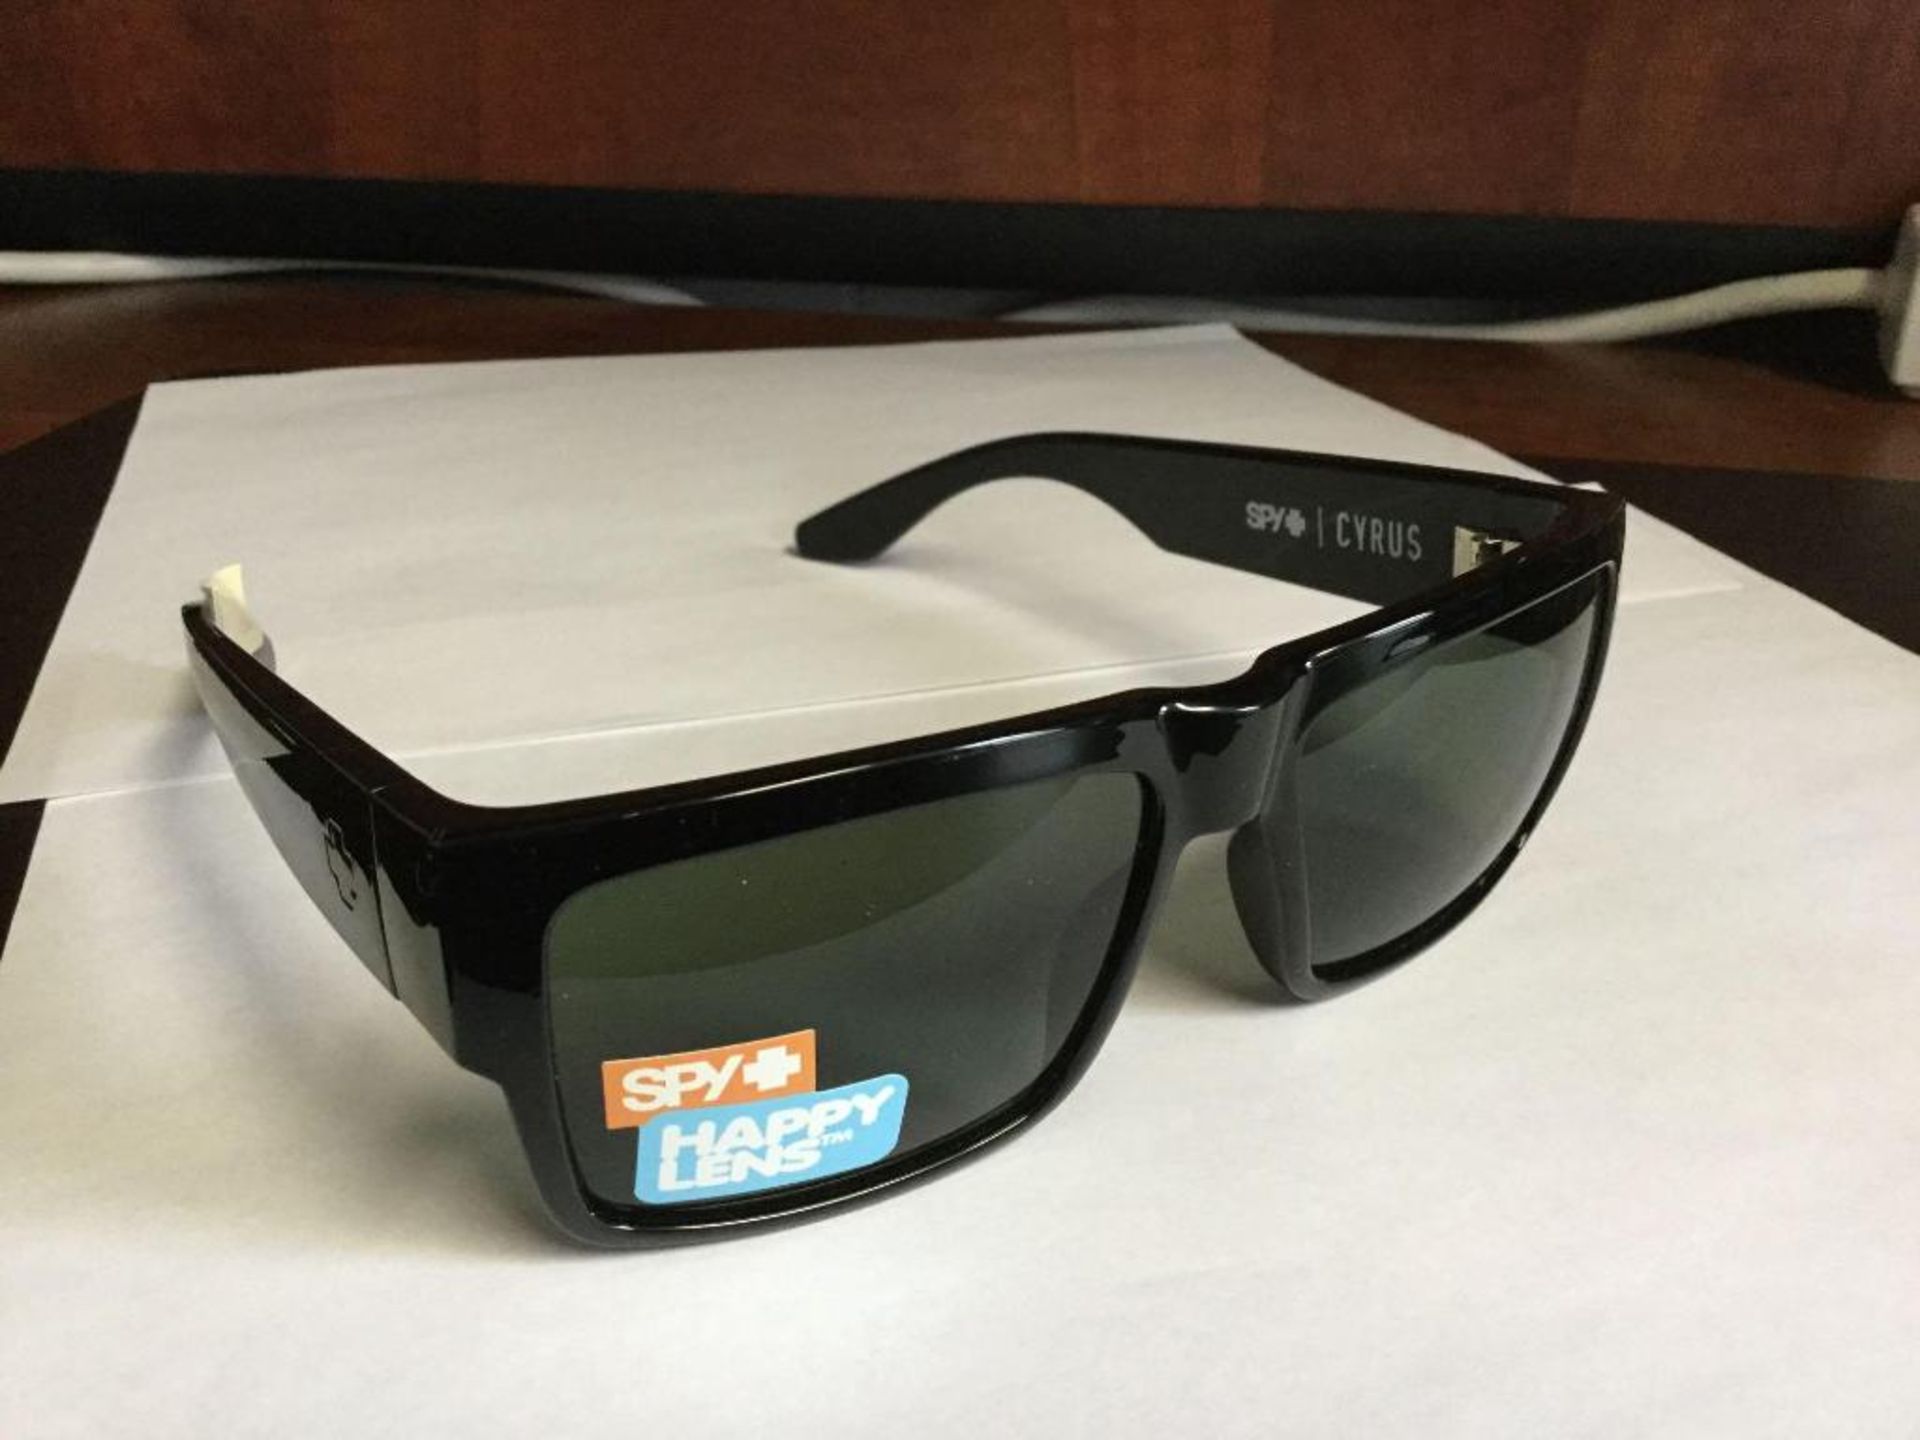 Spy plus Sunglasses - Happy Lens - with Case Value $ 120 - Image 2 of 2